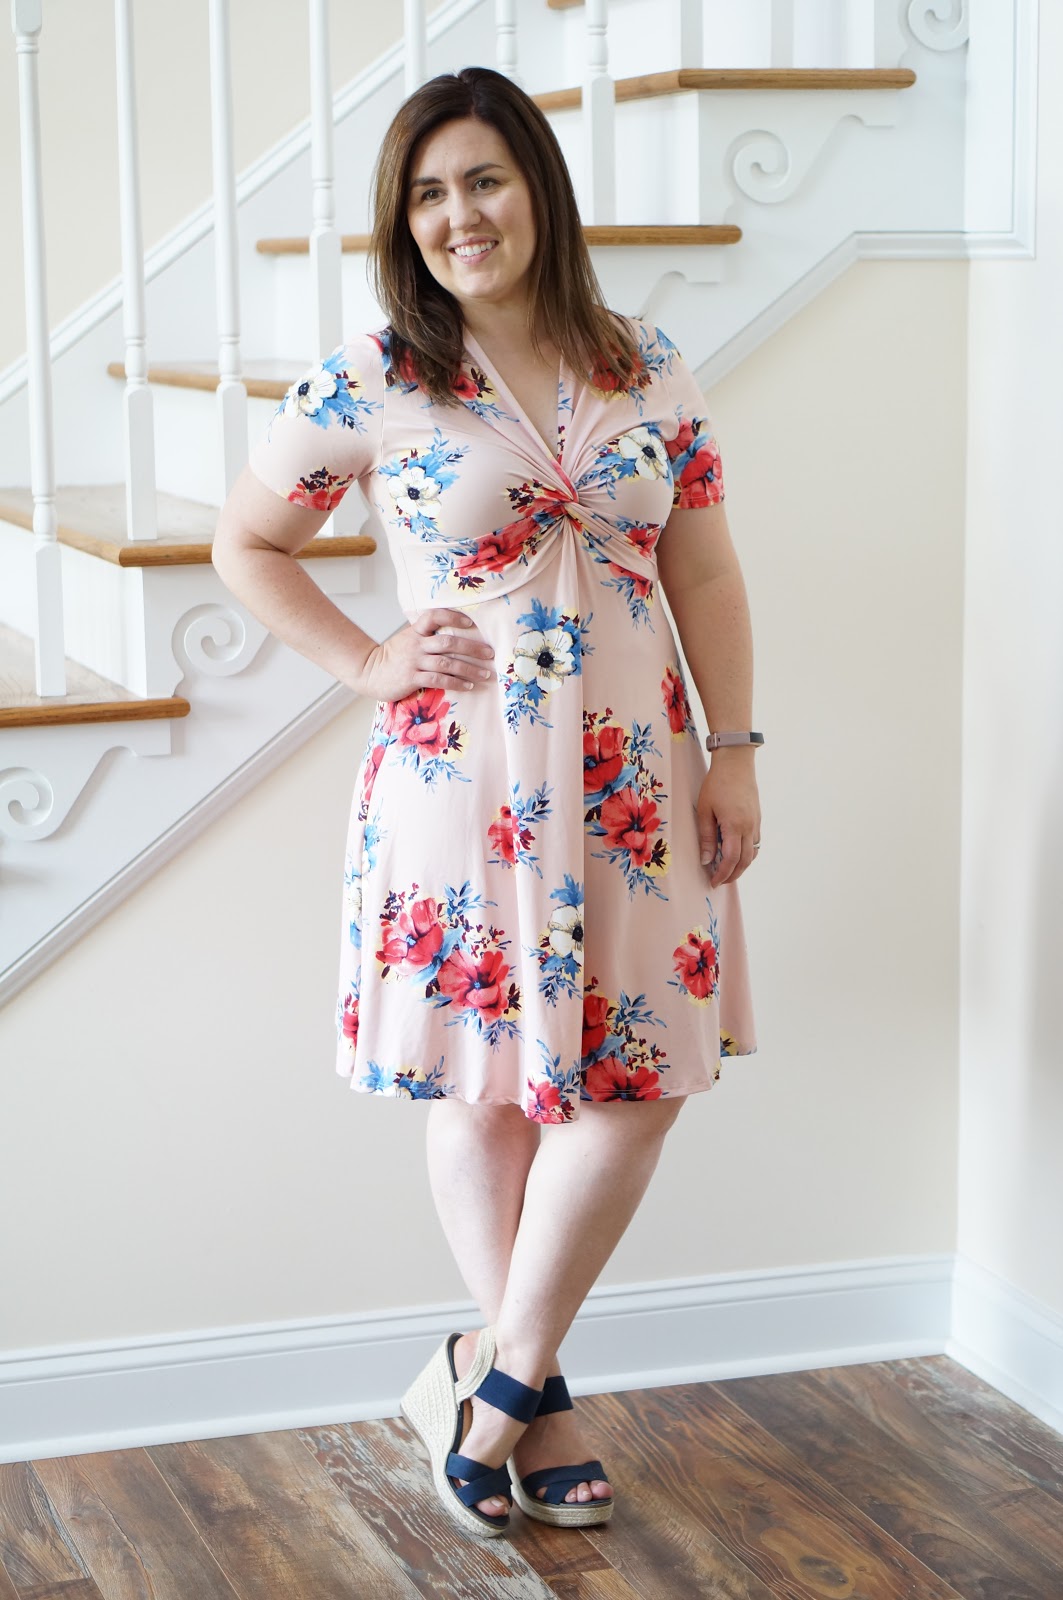 North Carolina style blogger Rebecca Lately shares how to style a simple floral dress for spring.  Check it out to read about her ethical find!